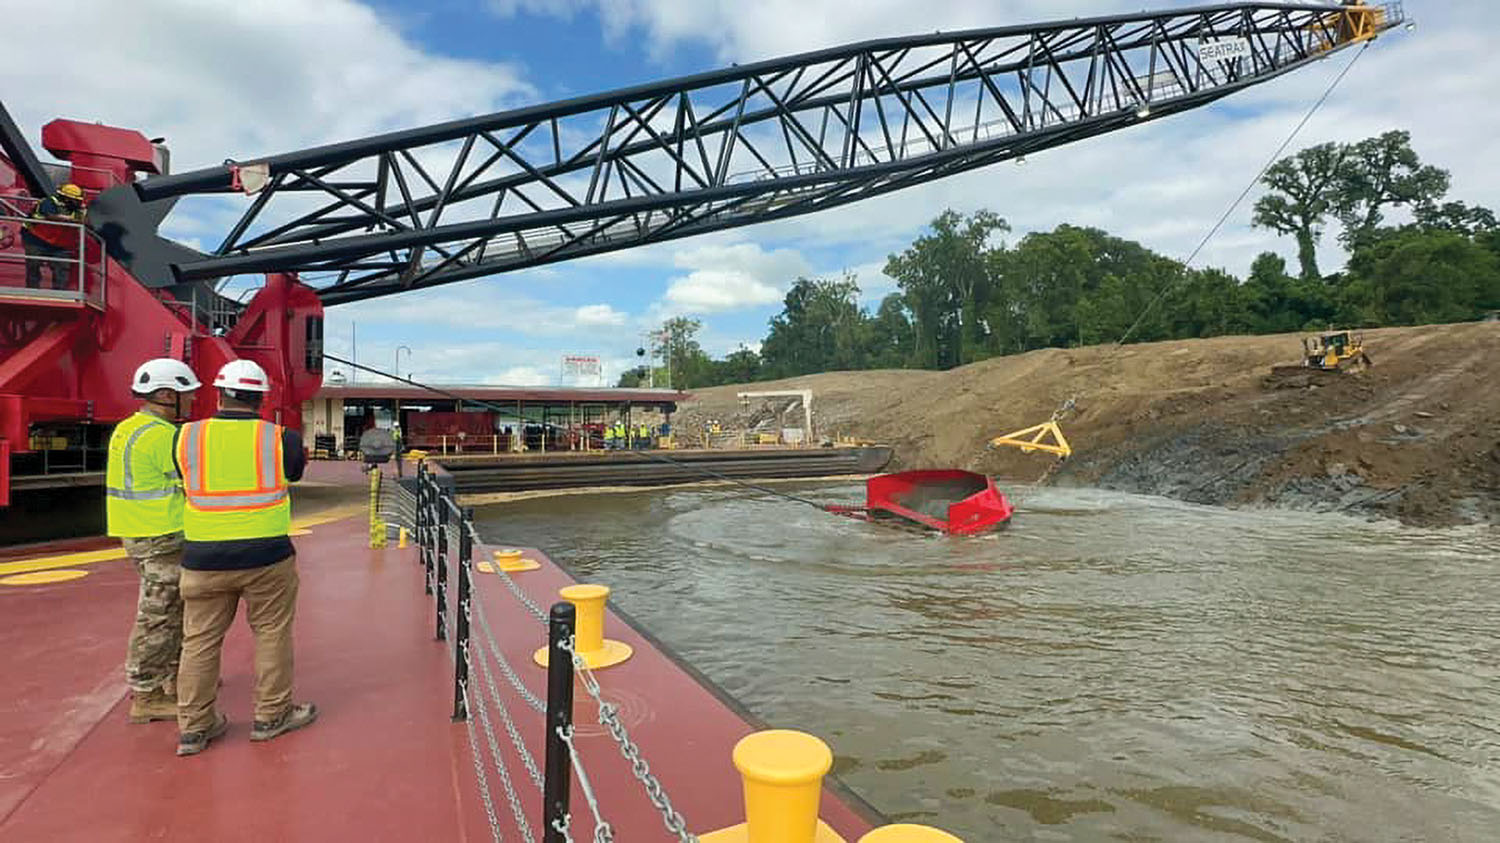 The new, $25.5 million bank grader, named Grader 1, is at work for the first time in revetment operations on the Lower Mississippi. It replaces a 74-year-old grader. (Photo courtesy of Memphis Engineer District)